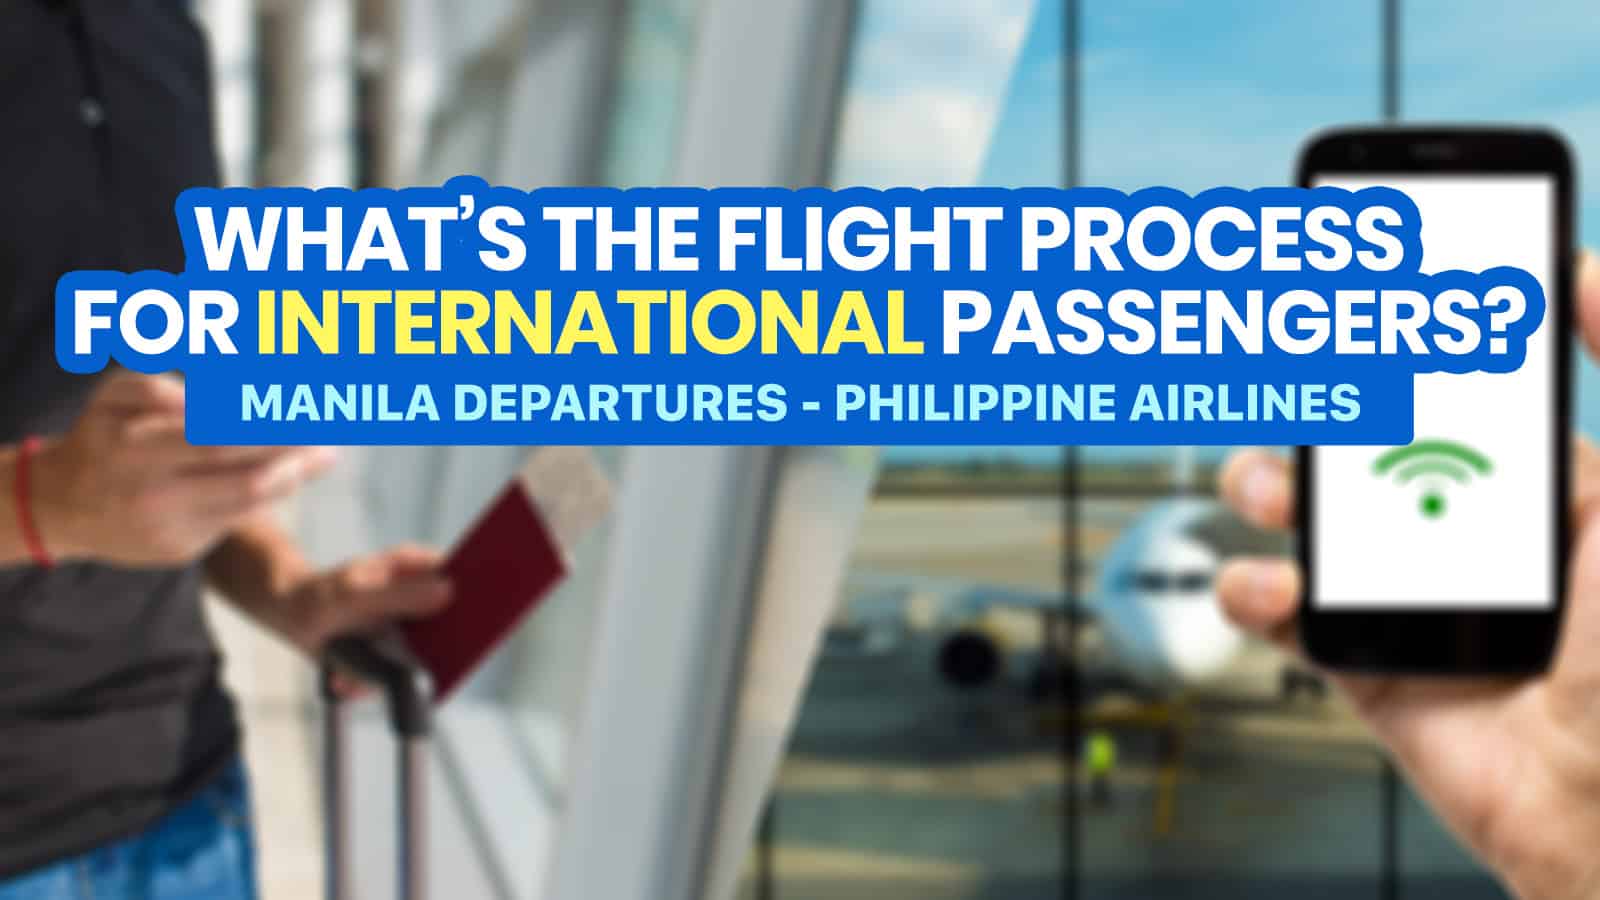 NEW INTERNATIONAL DEPARTURE PROCESS & TRAVEL REQUIREMENTS: For PAL Passengers from MANILA